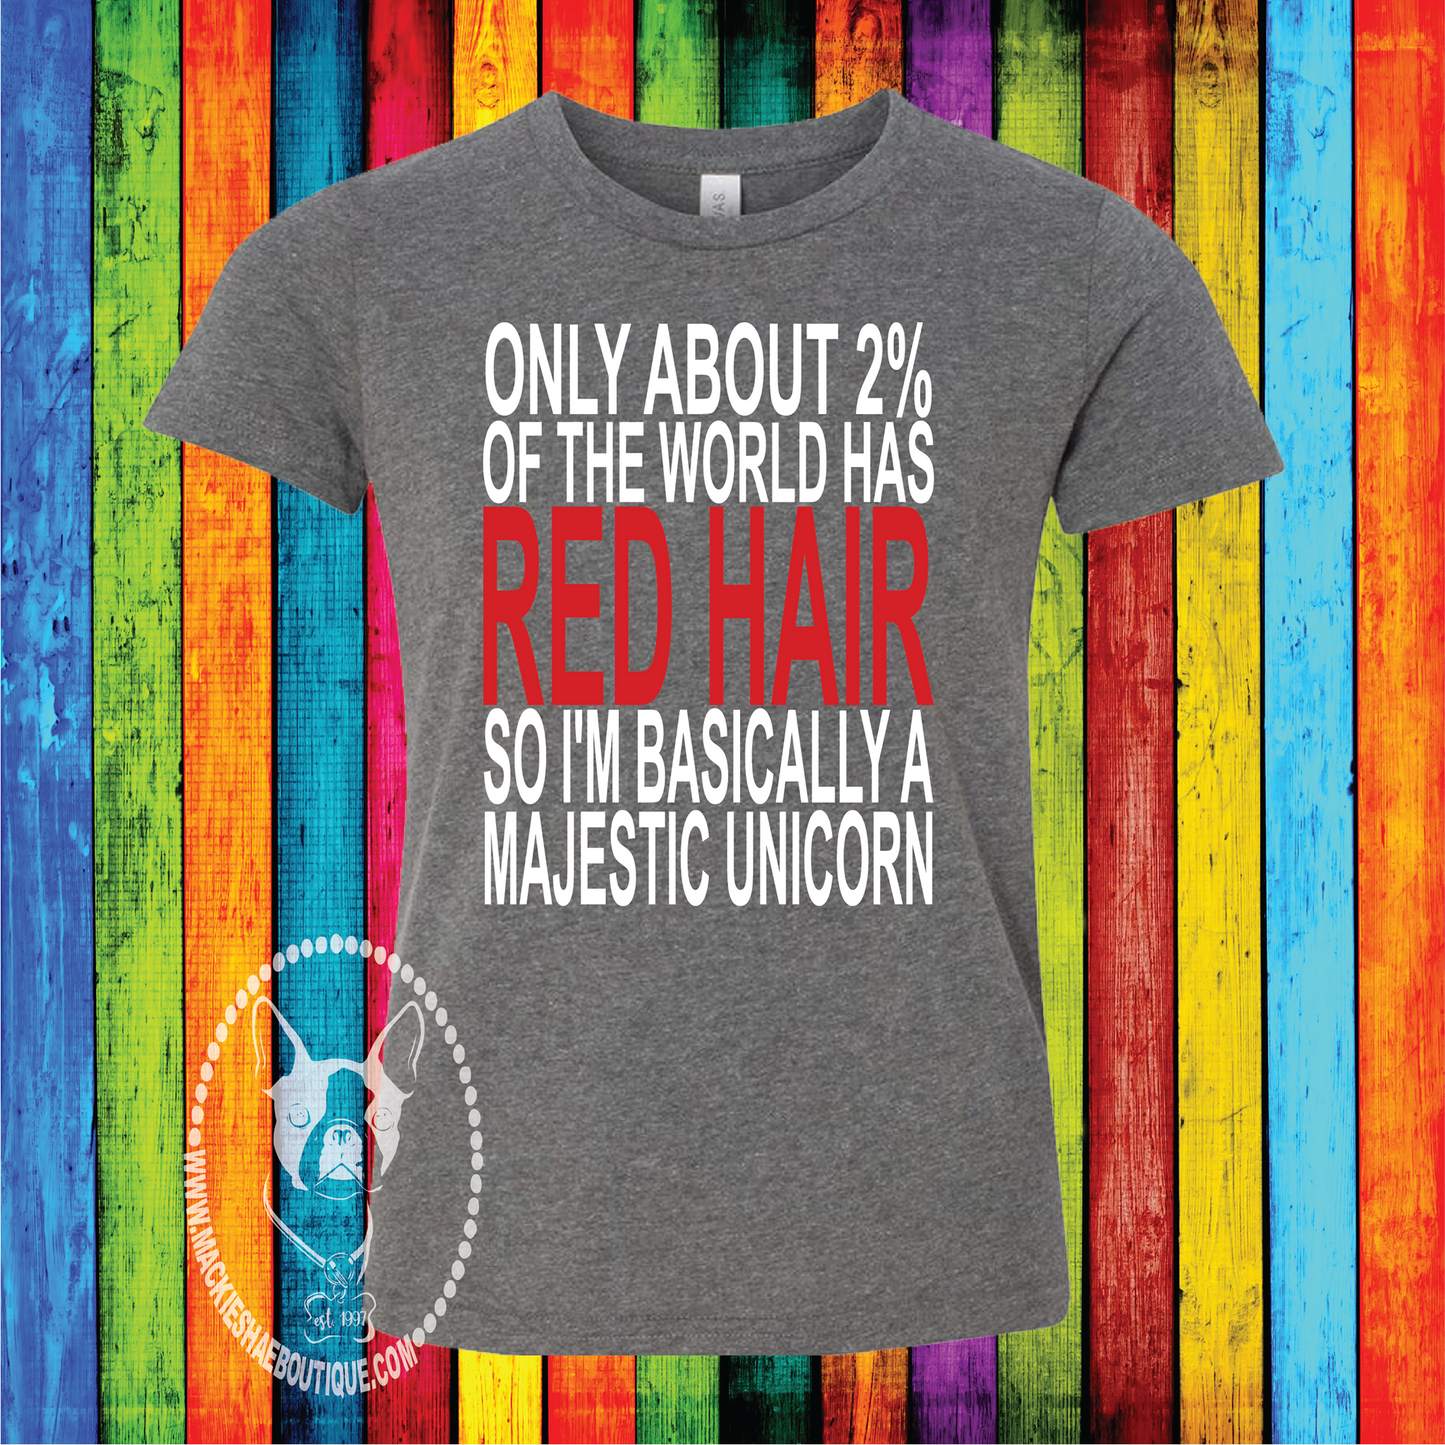 Only About 2% of the World has Red Hair so I'm Basically a Majestic Unicorn Custom Shirt for Kids, Short Sleeve